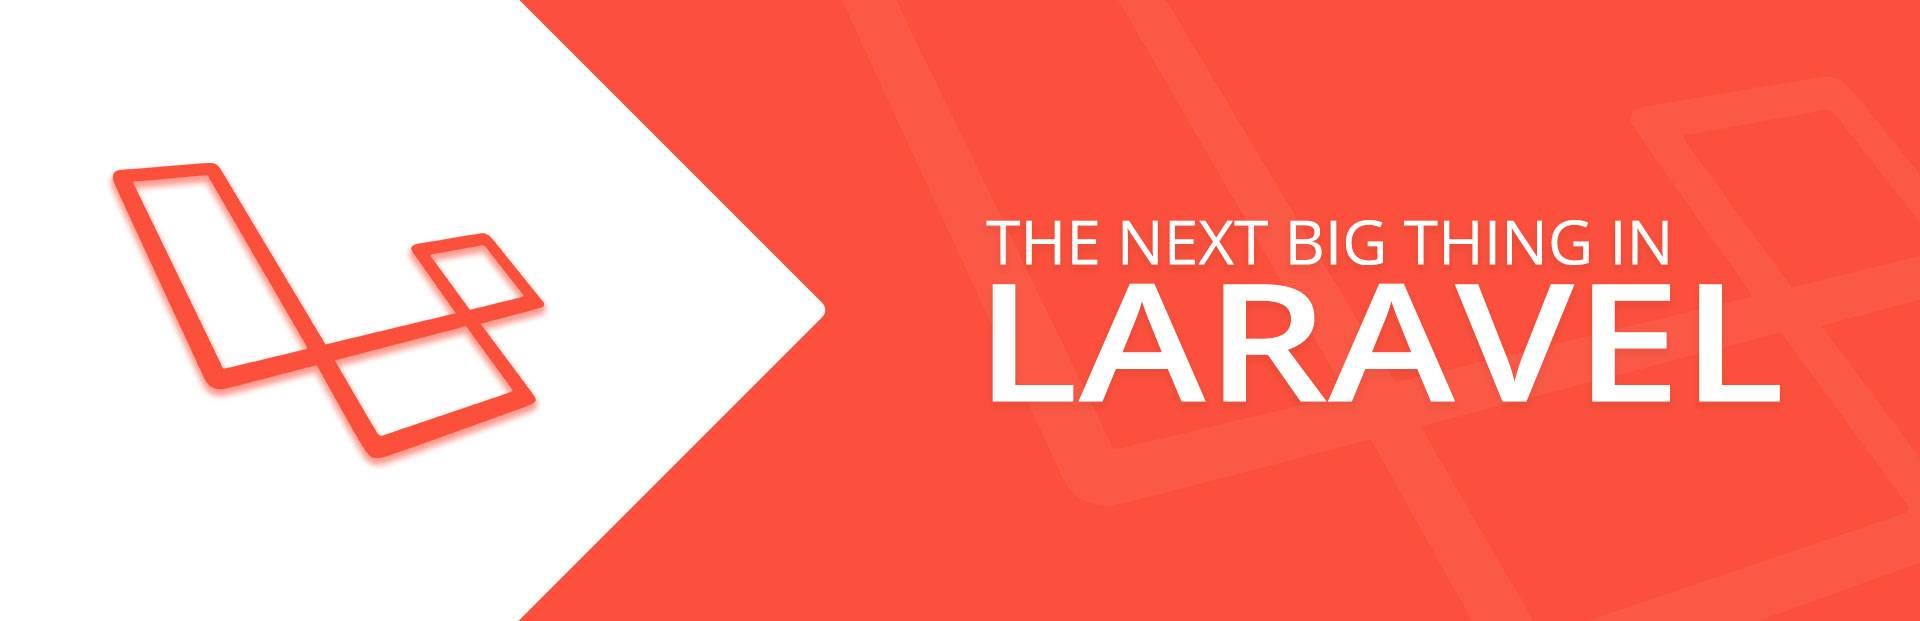 New features in Laravel 5.8 and event updates